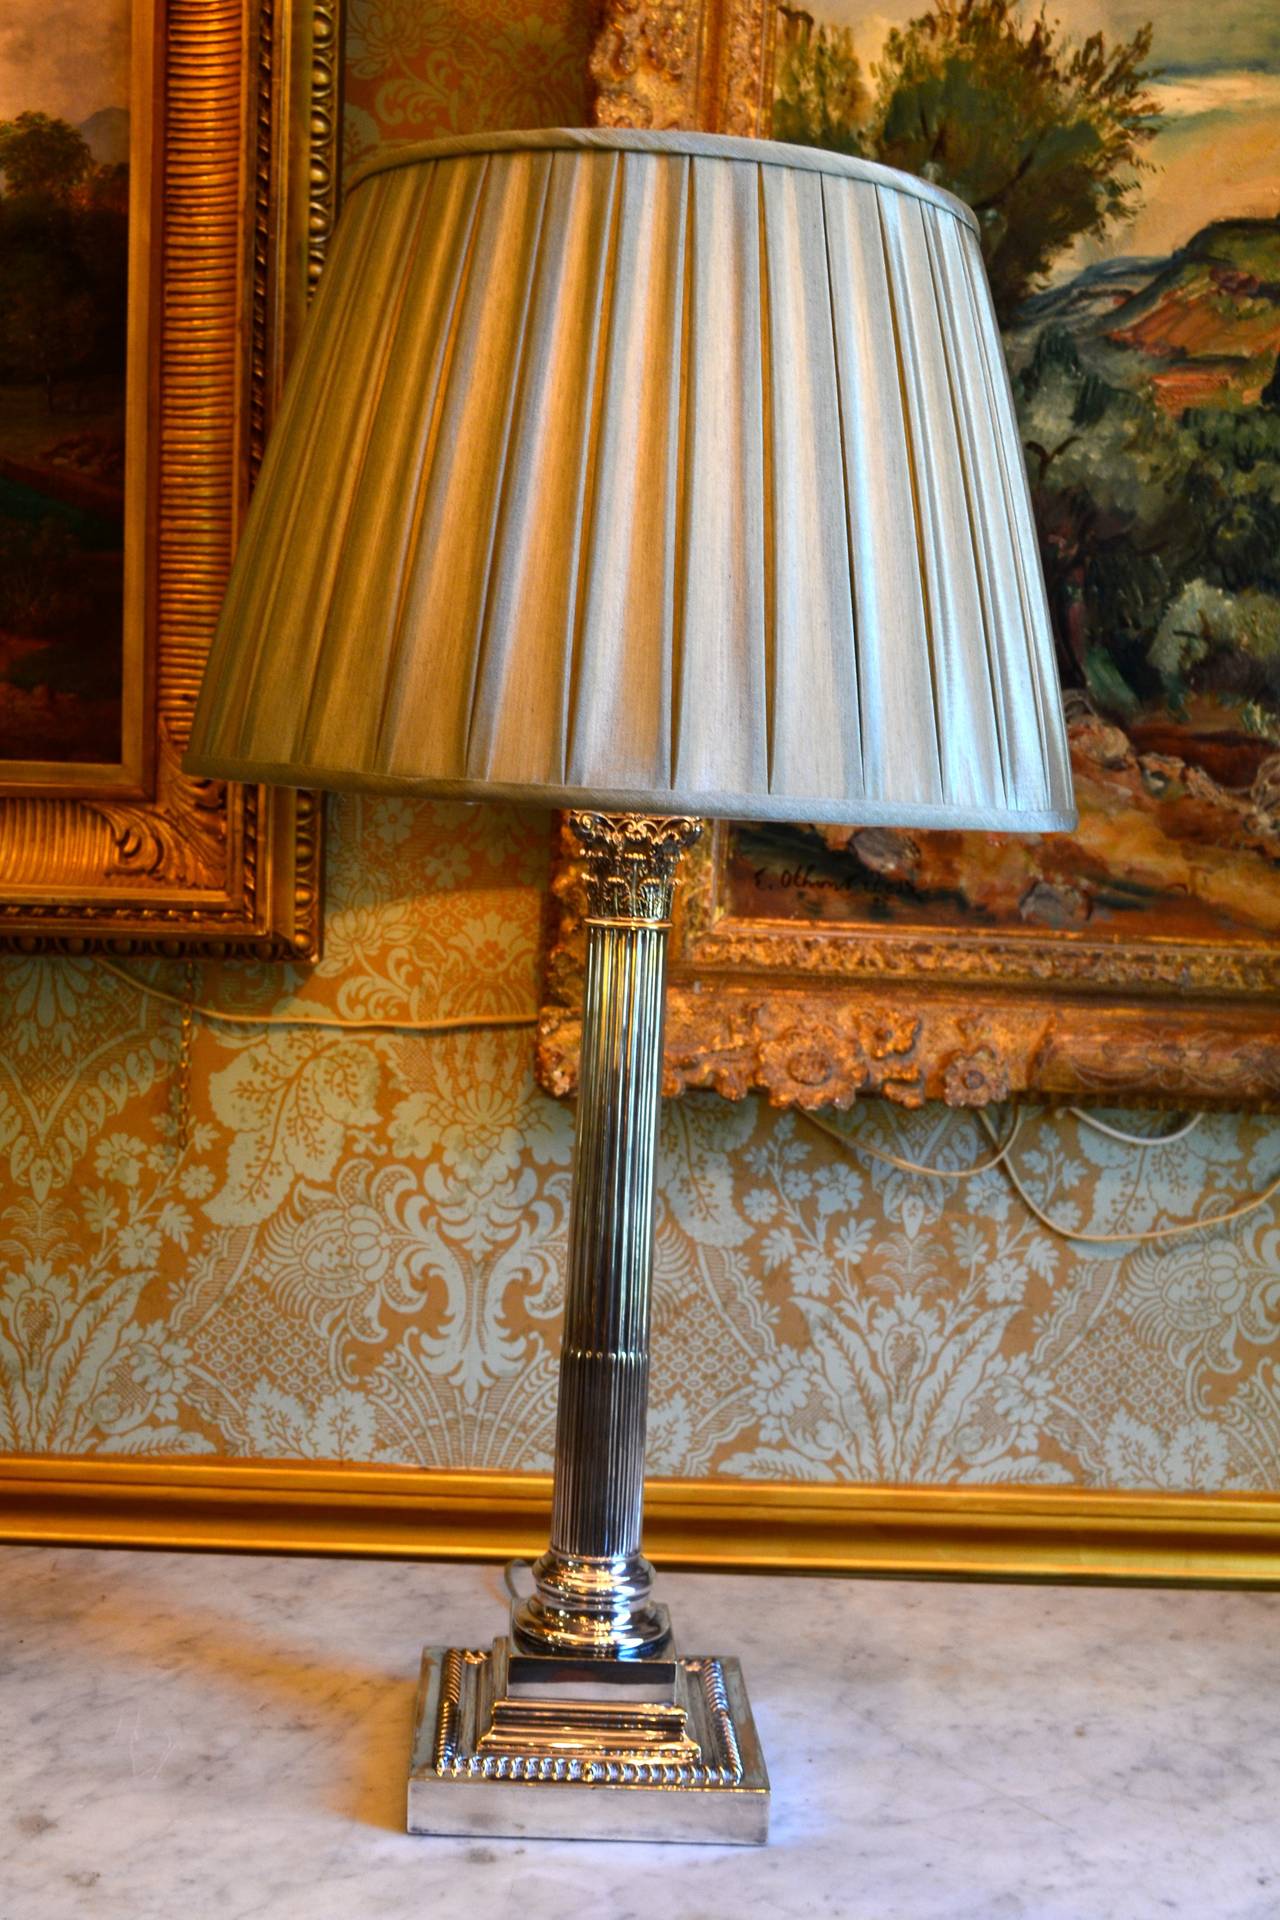 Great Britain (UK) English Classical Silver Plated Corinthian Column Lamp with Silk Shade For Sale